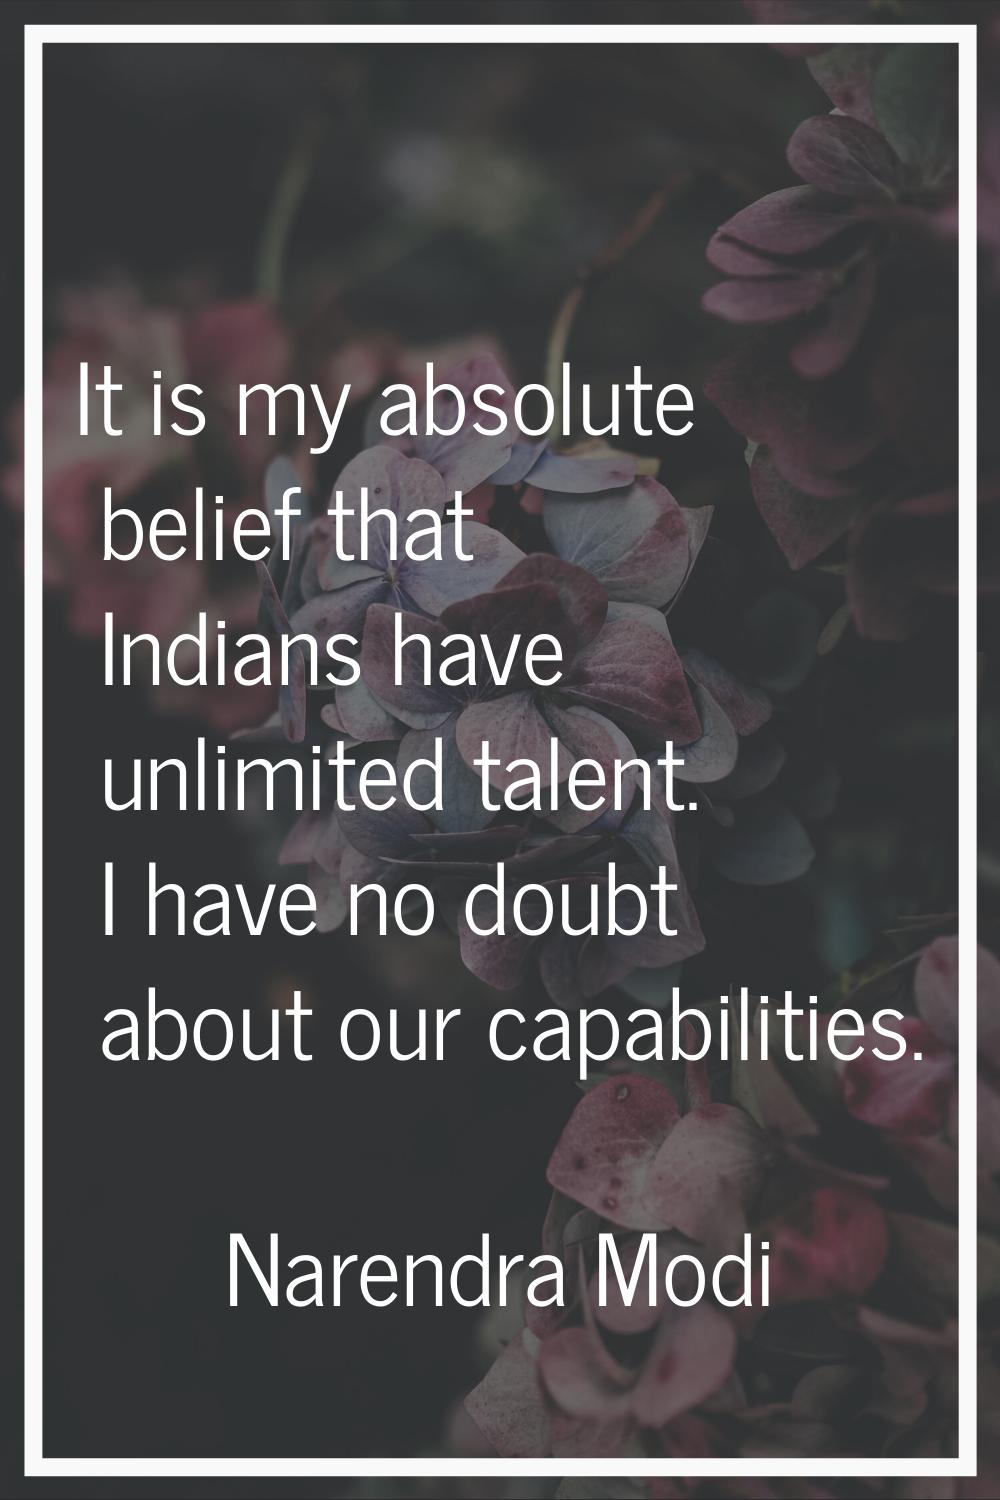 It is my absolute belief that Indians have unlimited talent. I have no doubt about our capabilities